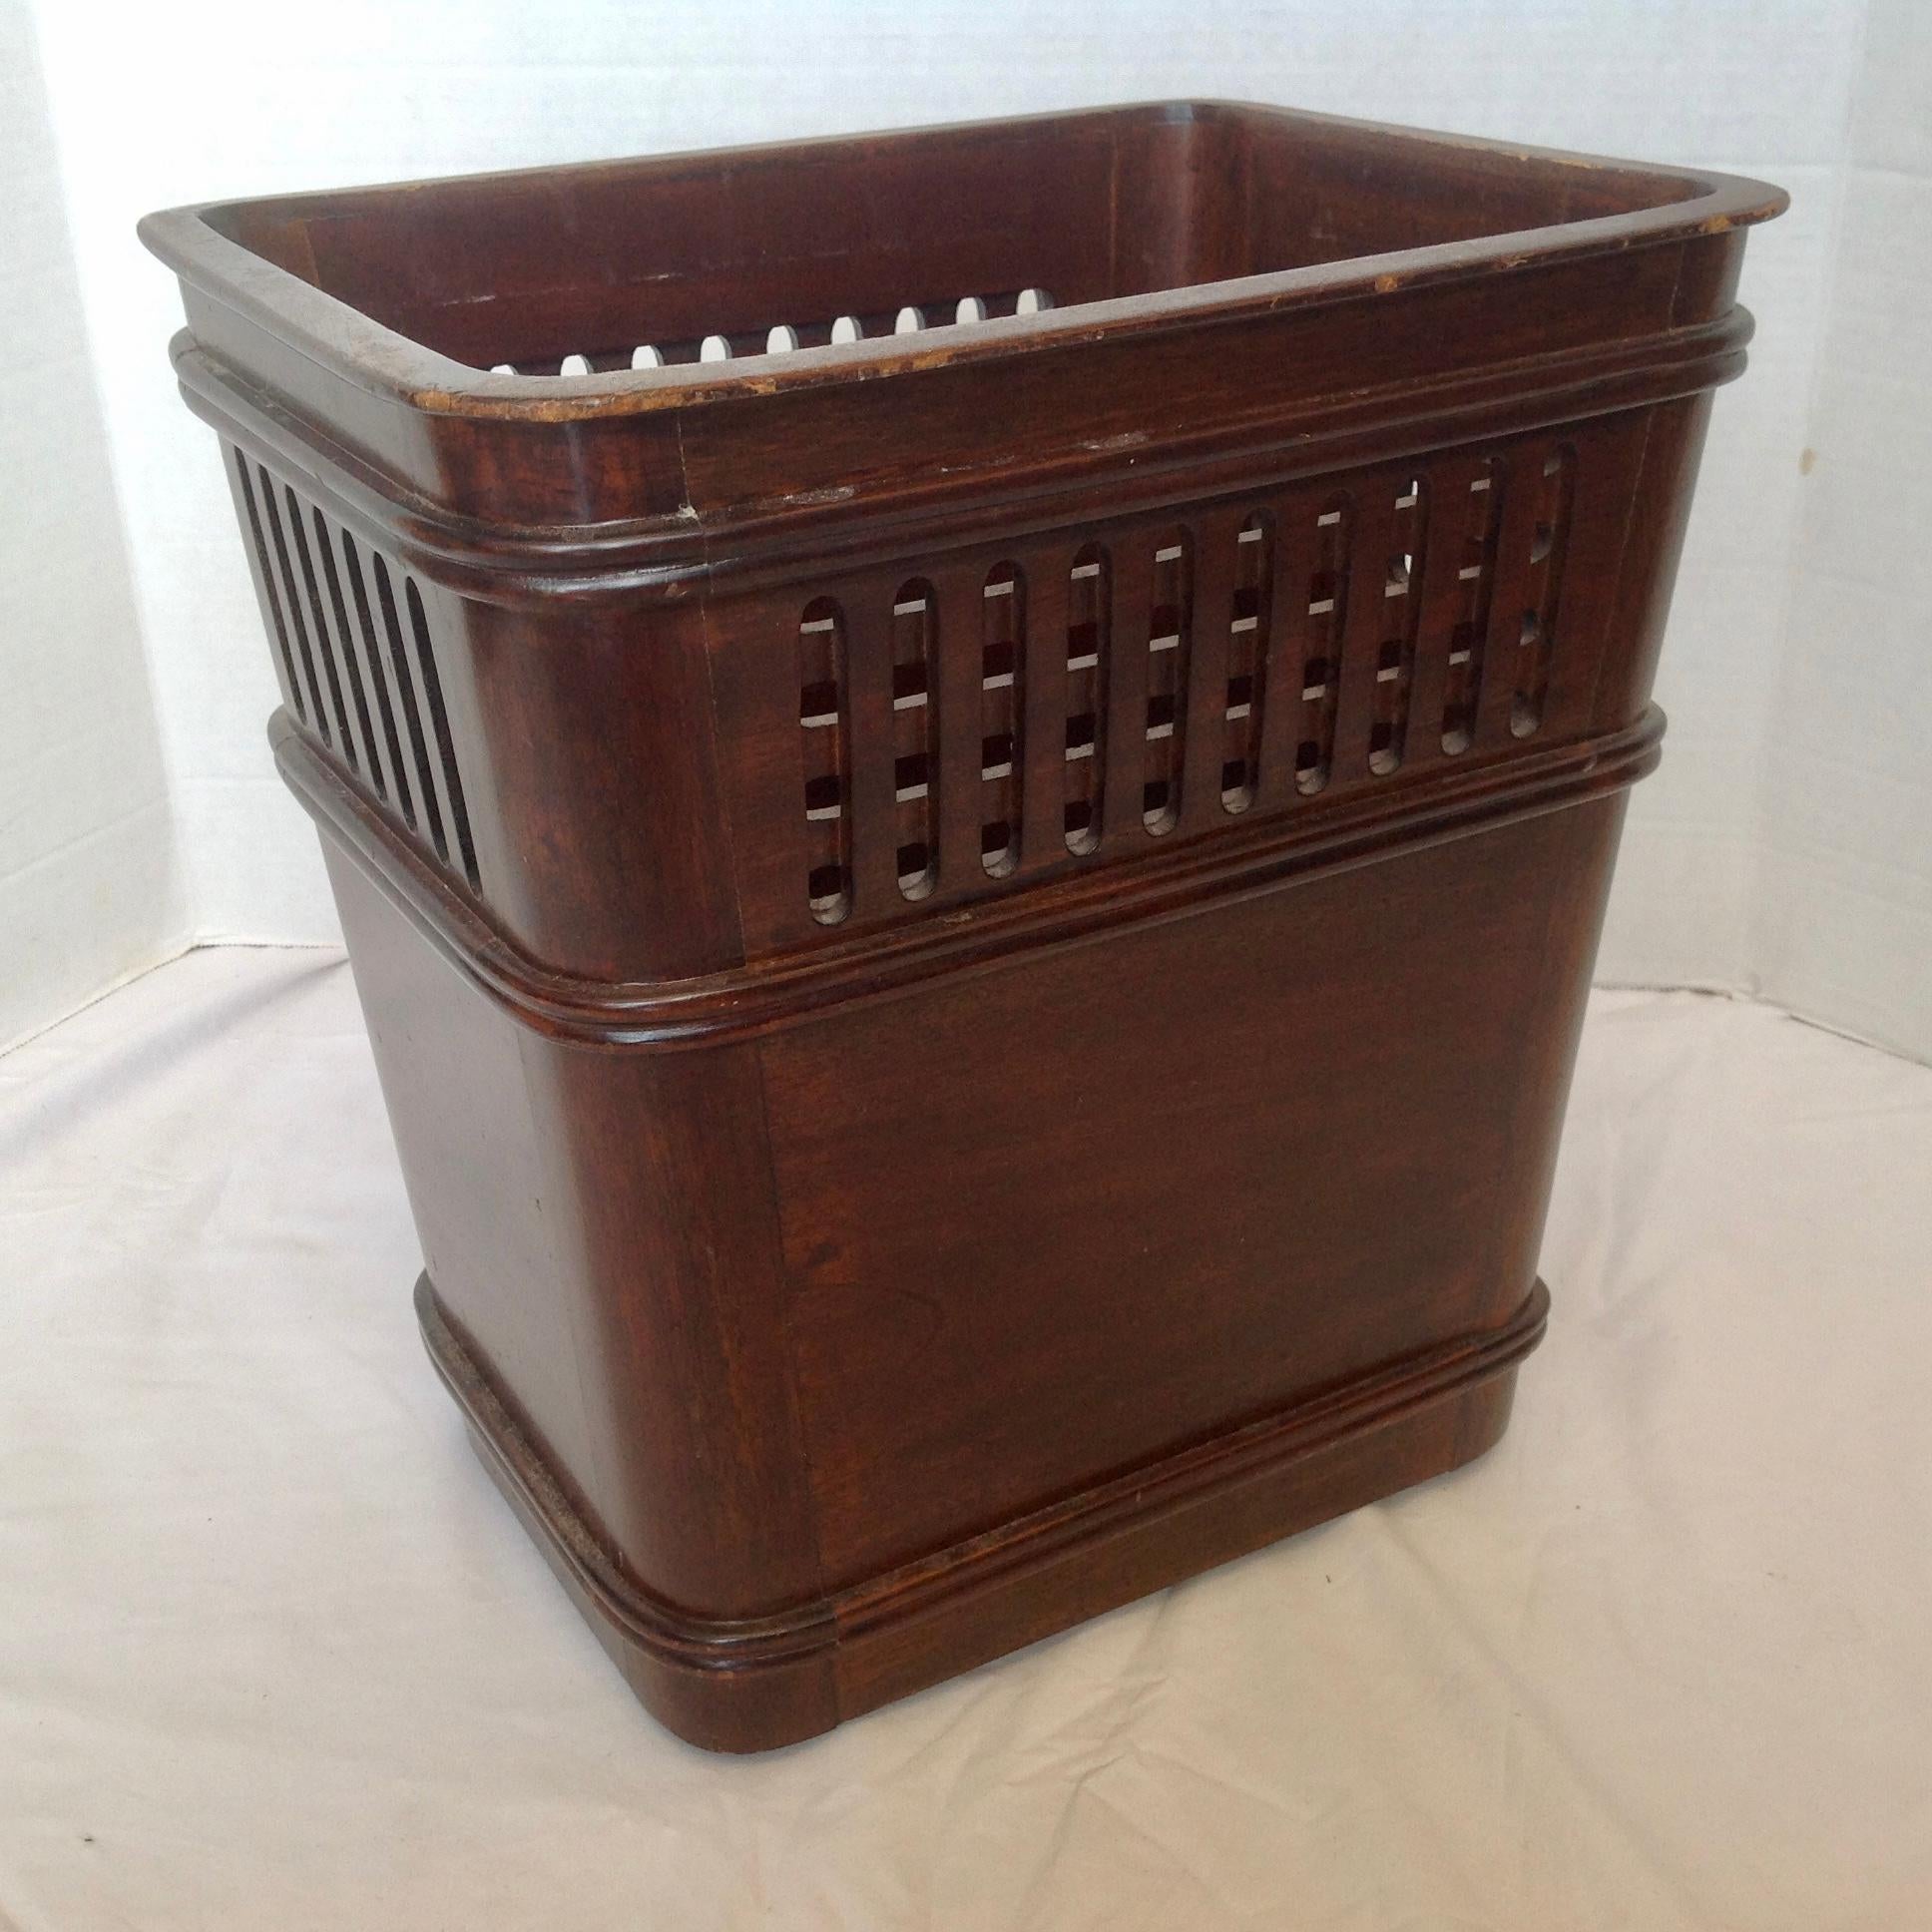 Designed with a lattice like upper half.
Nicely detailed through out with a deep mahogany finish.